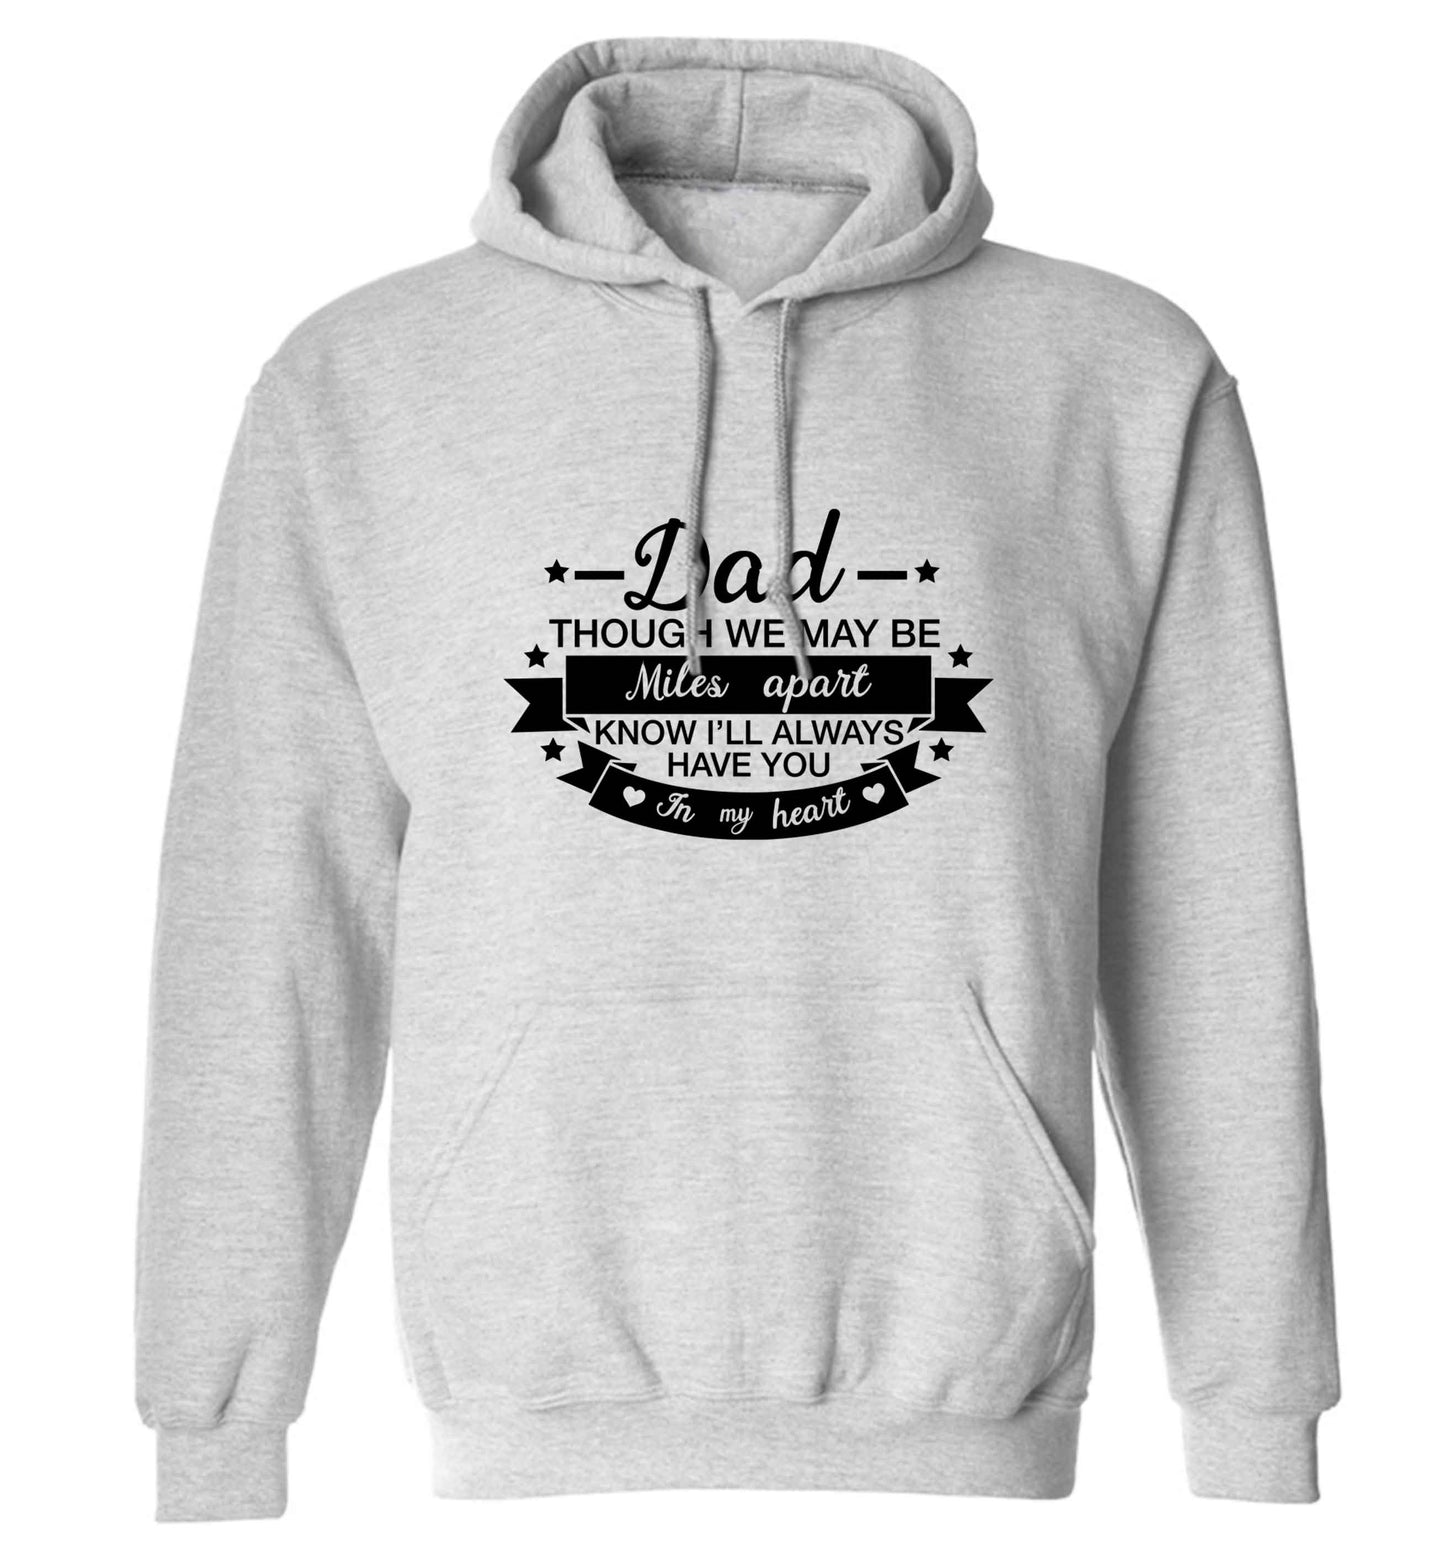 Dad though we are miles apart know I'll always have you in my heart adults unisex grey hoodie 2XL